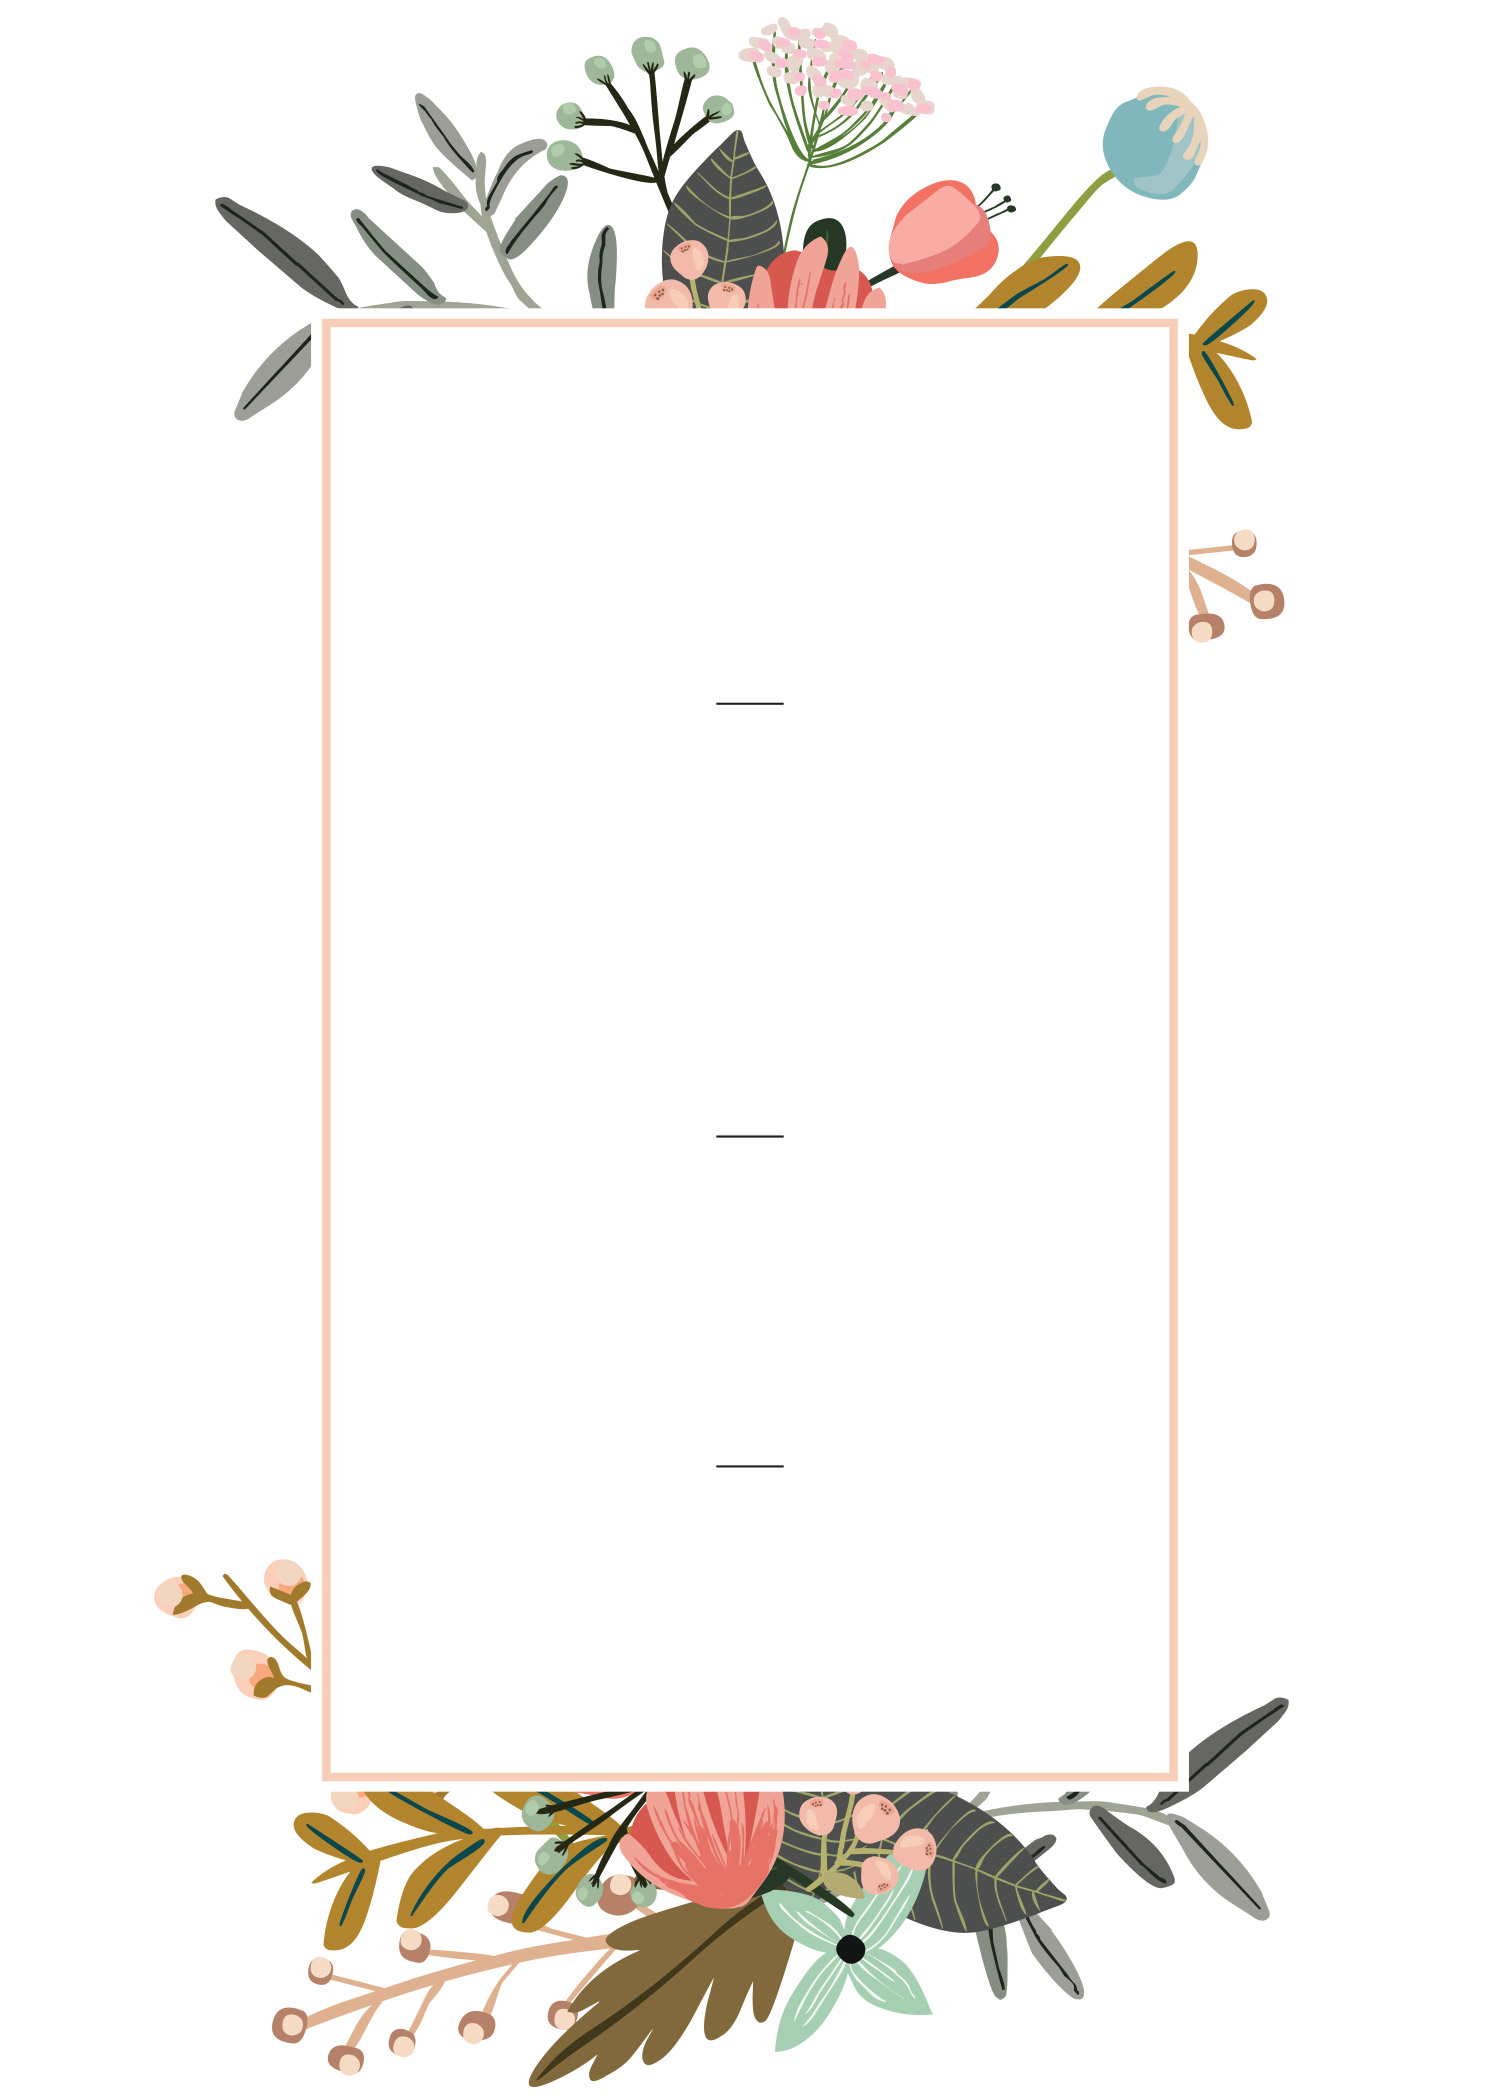 Editable Wedding Invitation Templates for the Perfect Card | Shutterfly